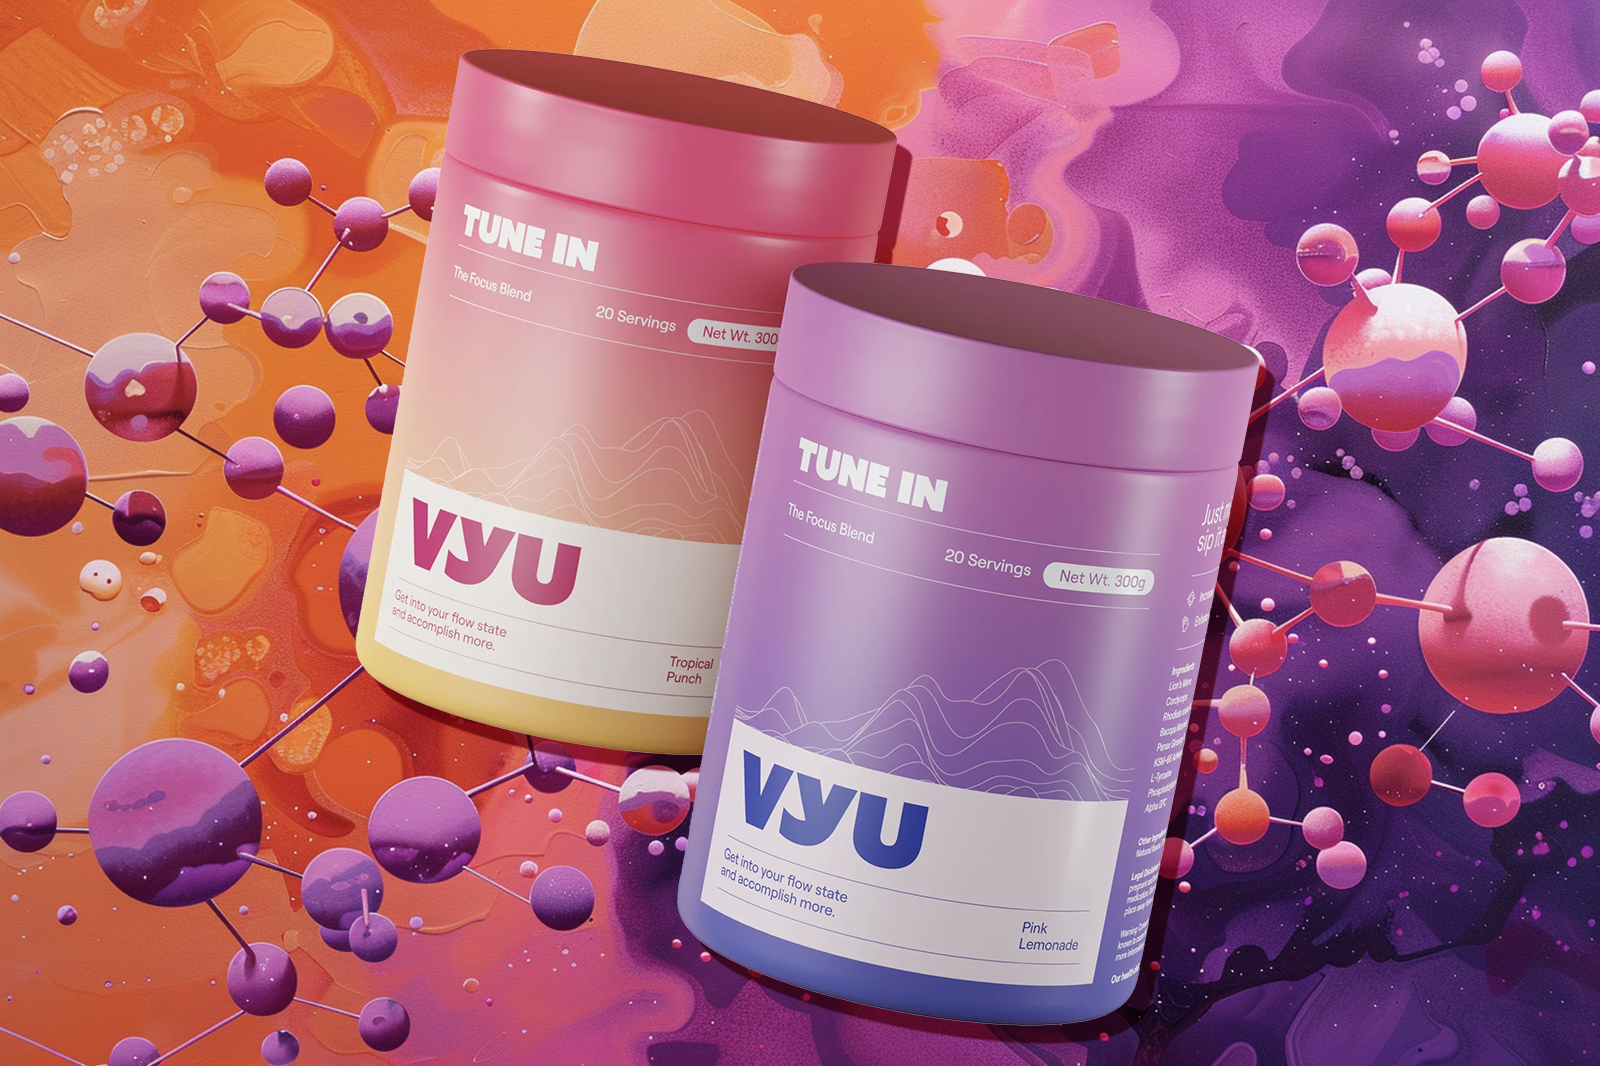 Two different flavors of VYU TUNE IN containers placed against a colorful molecular background